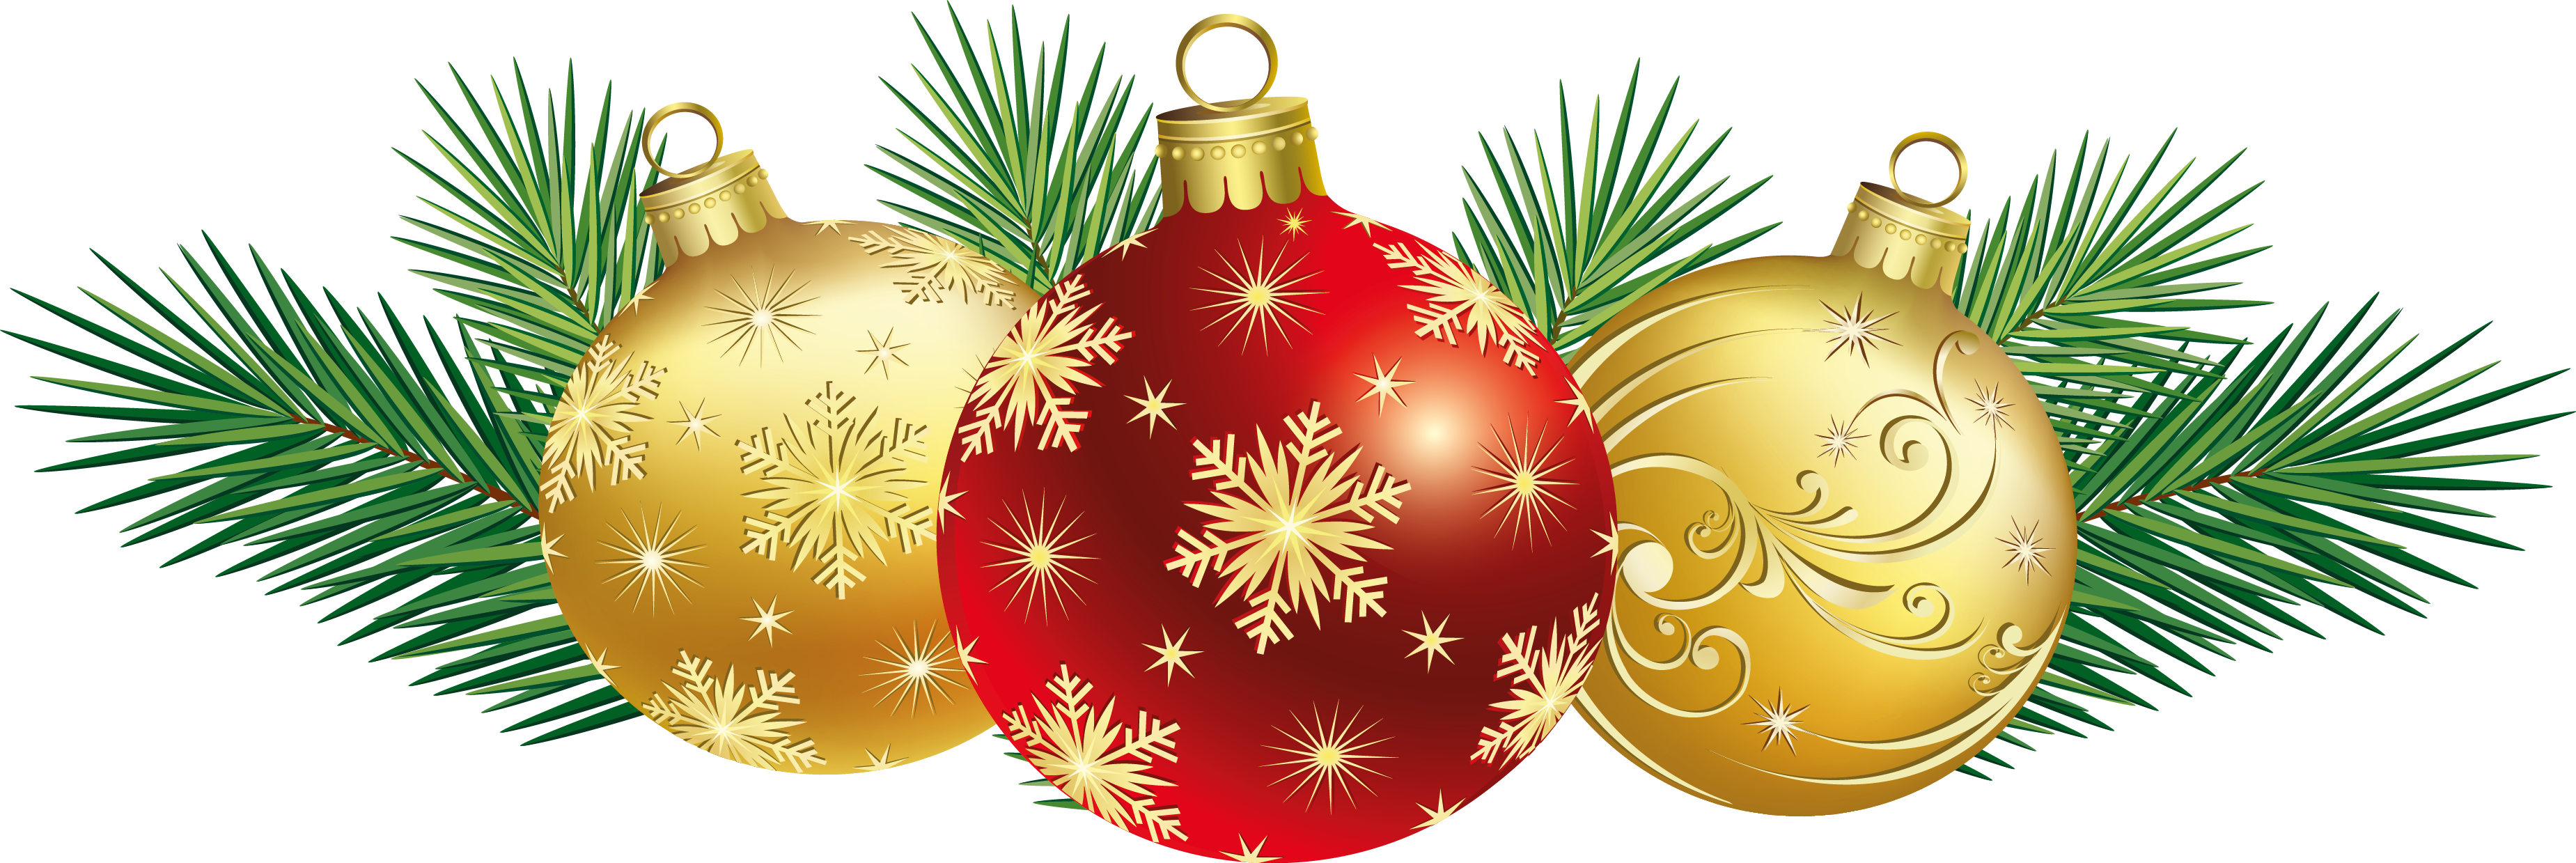 clipart christmas decorations - photo #18